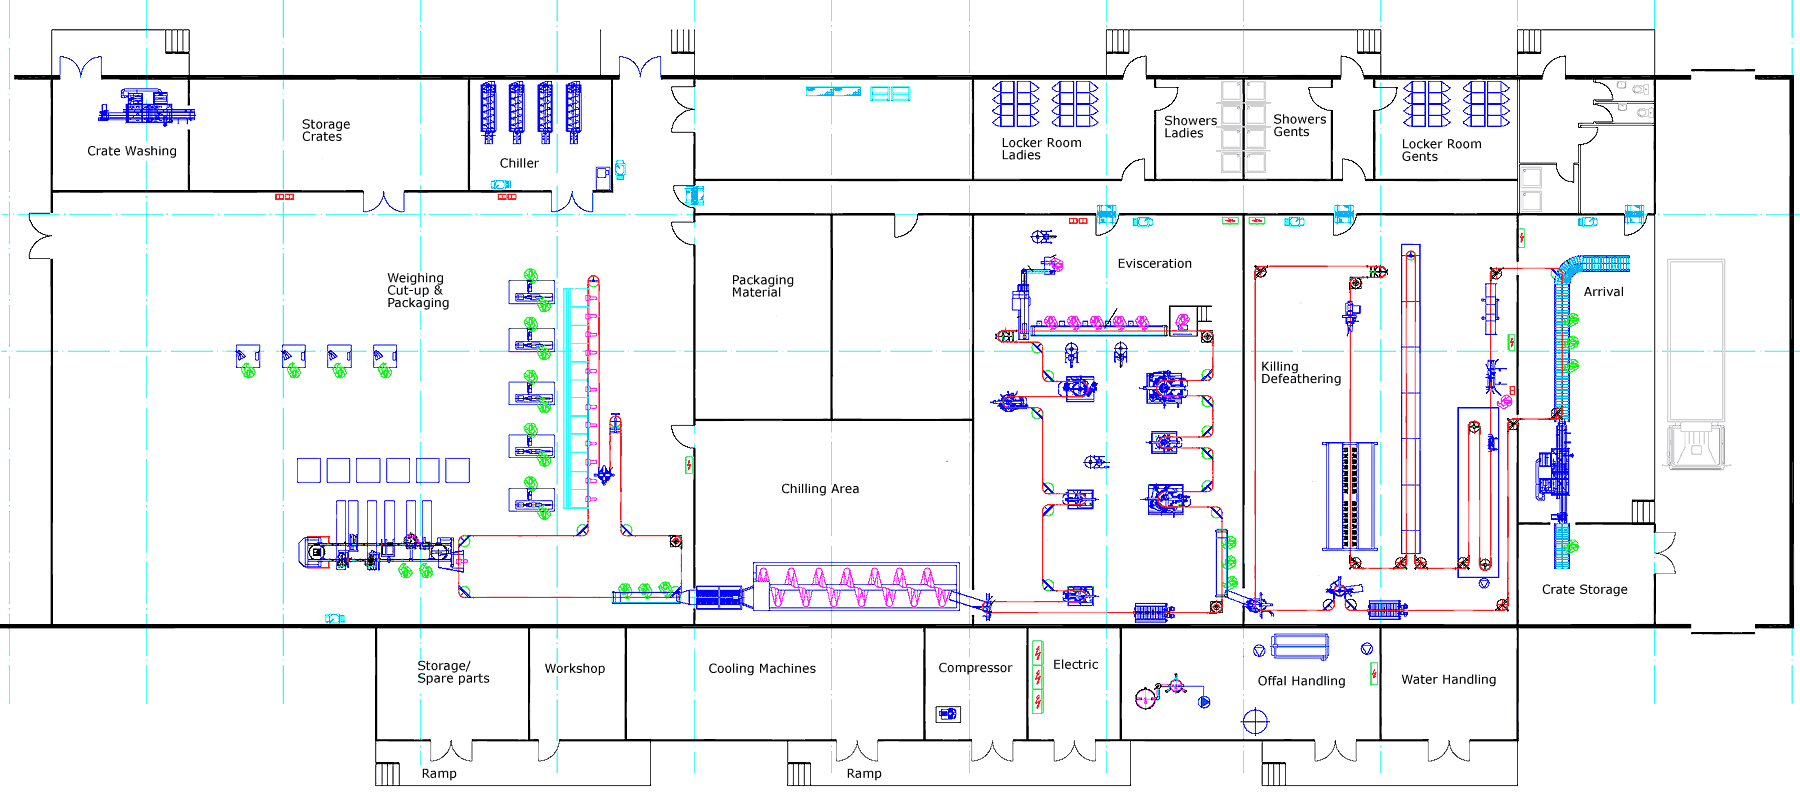 3000bph factory layout